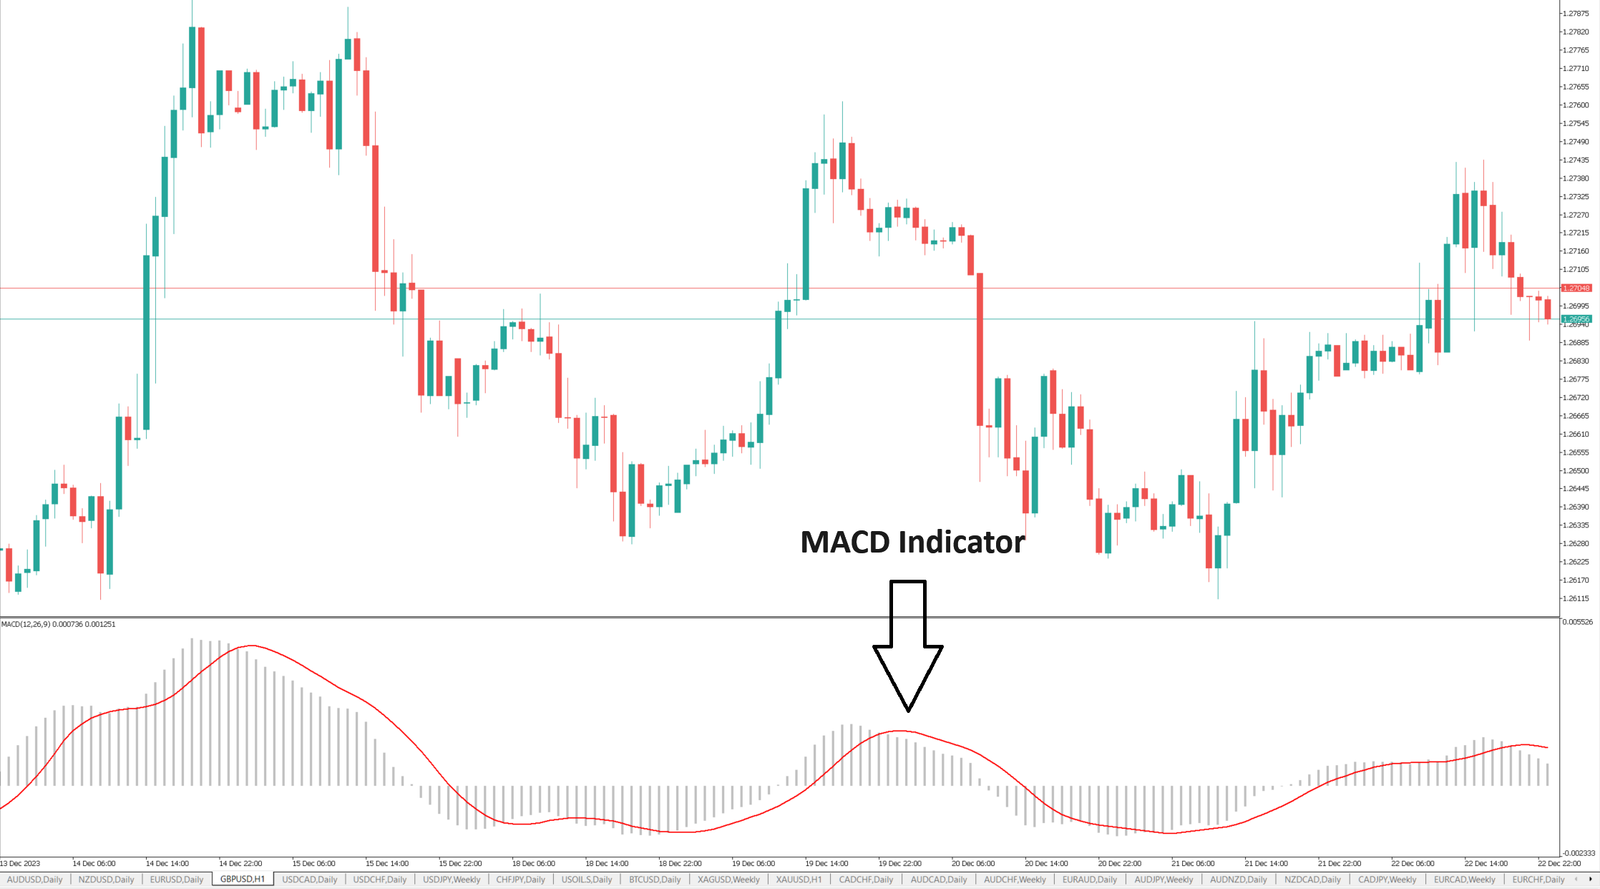 macd, MACD Indicator, Moving Average Convergence, Divergence, technical indicator, main signals of the MACD, price direction, possibility of the stock price falling, MACD line and the zero line, Convergence/divergence, highest price, sign of trend weakness, trend reversal,